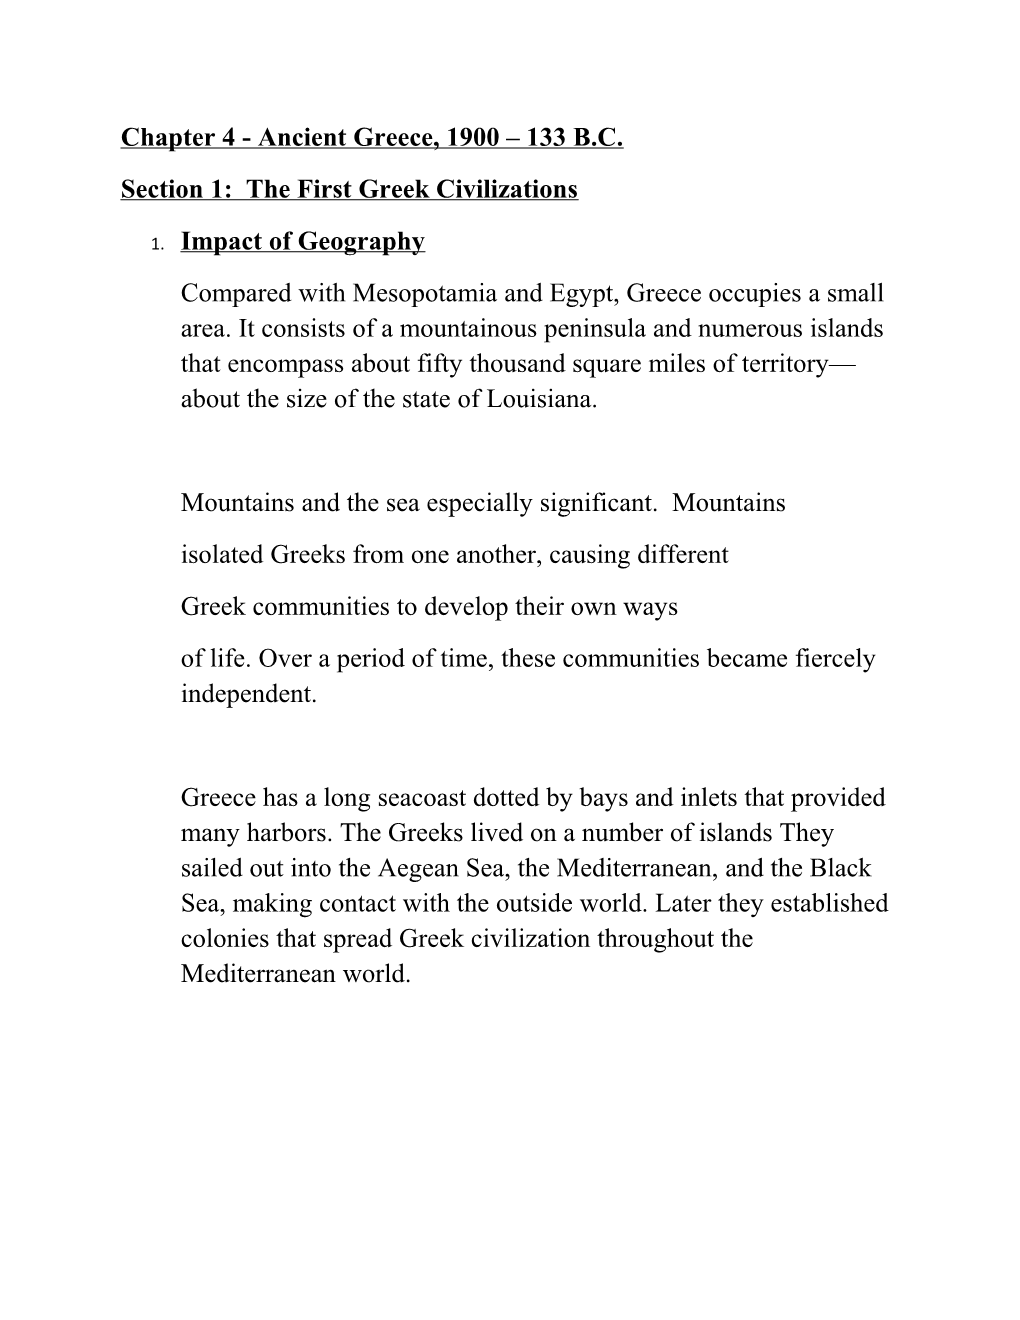 Section 1: the First Greek Civilizations